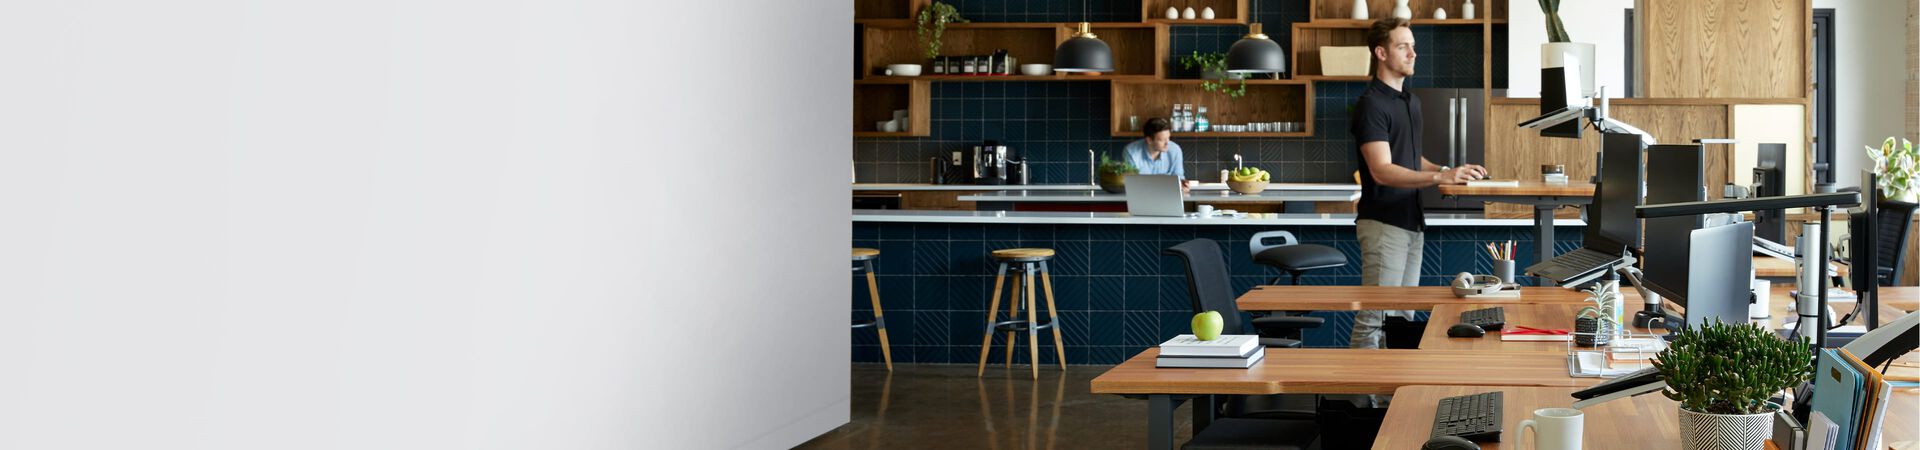 standing desks, office chairs, and other office furniture in an open workspace